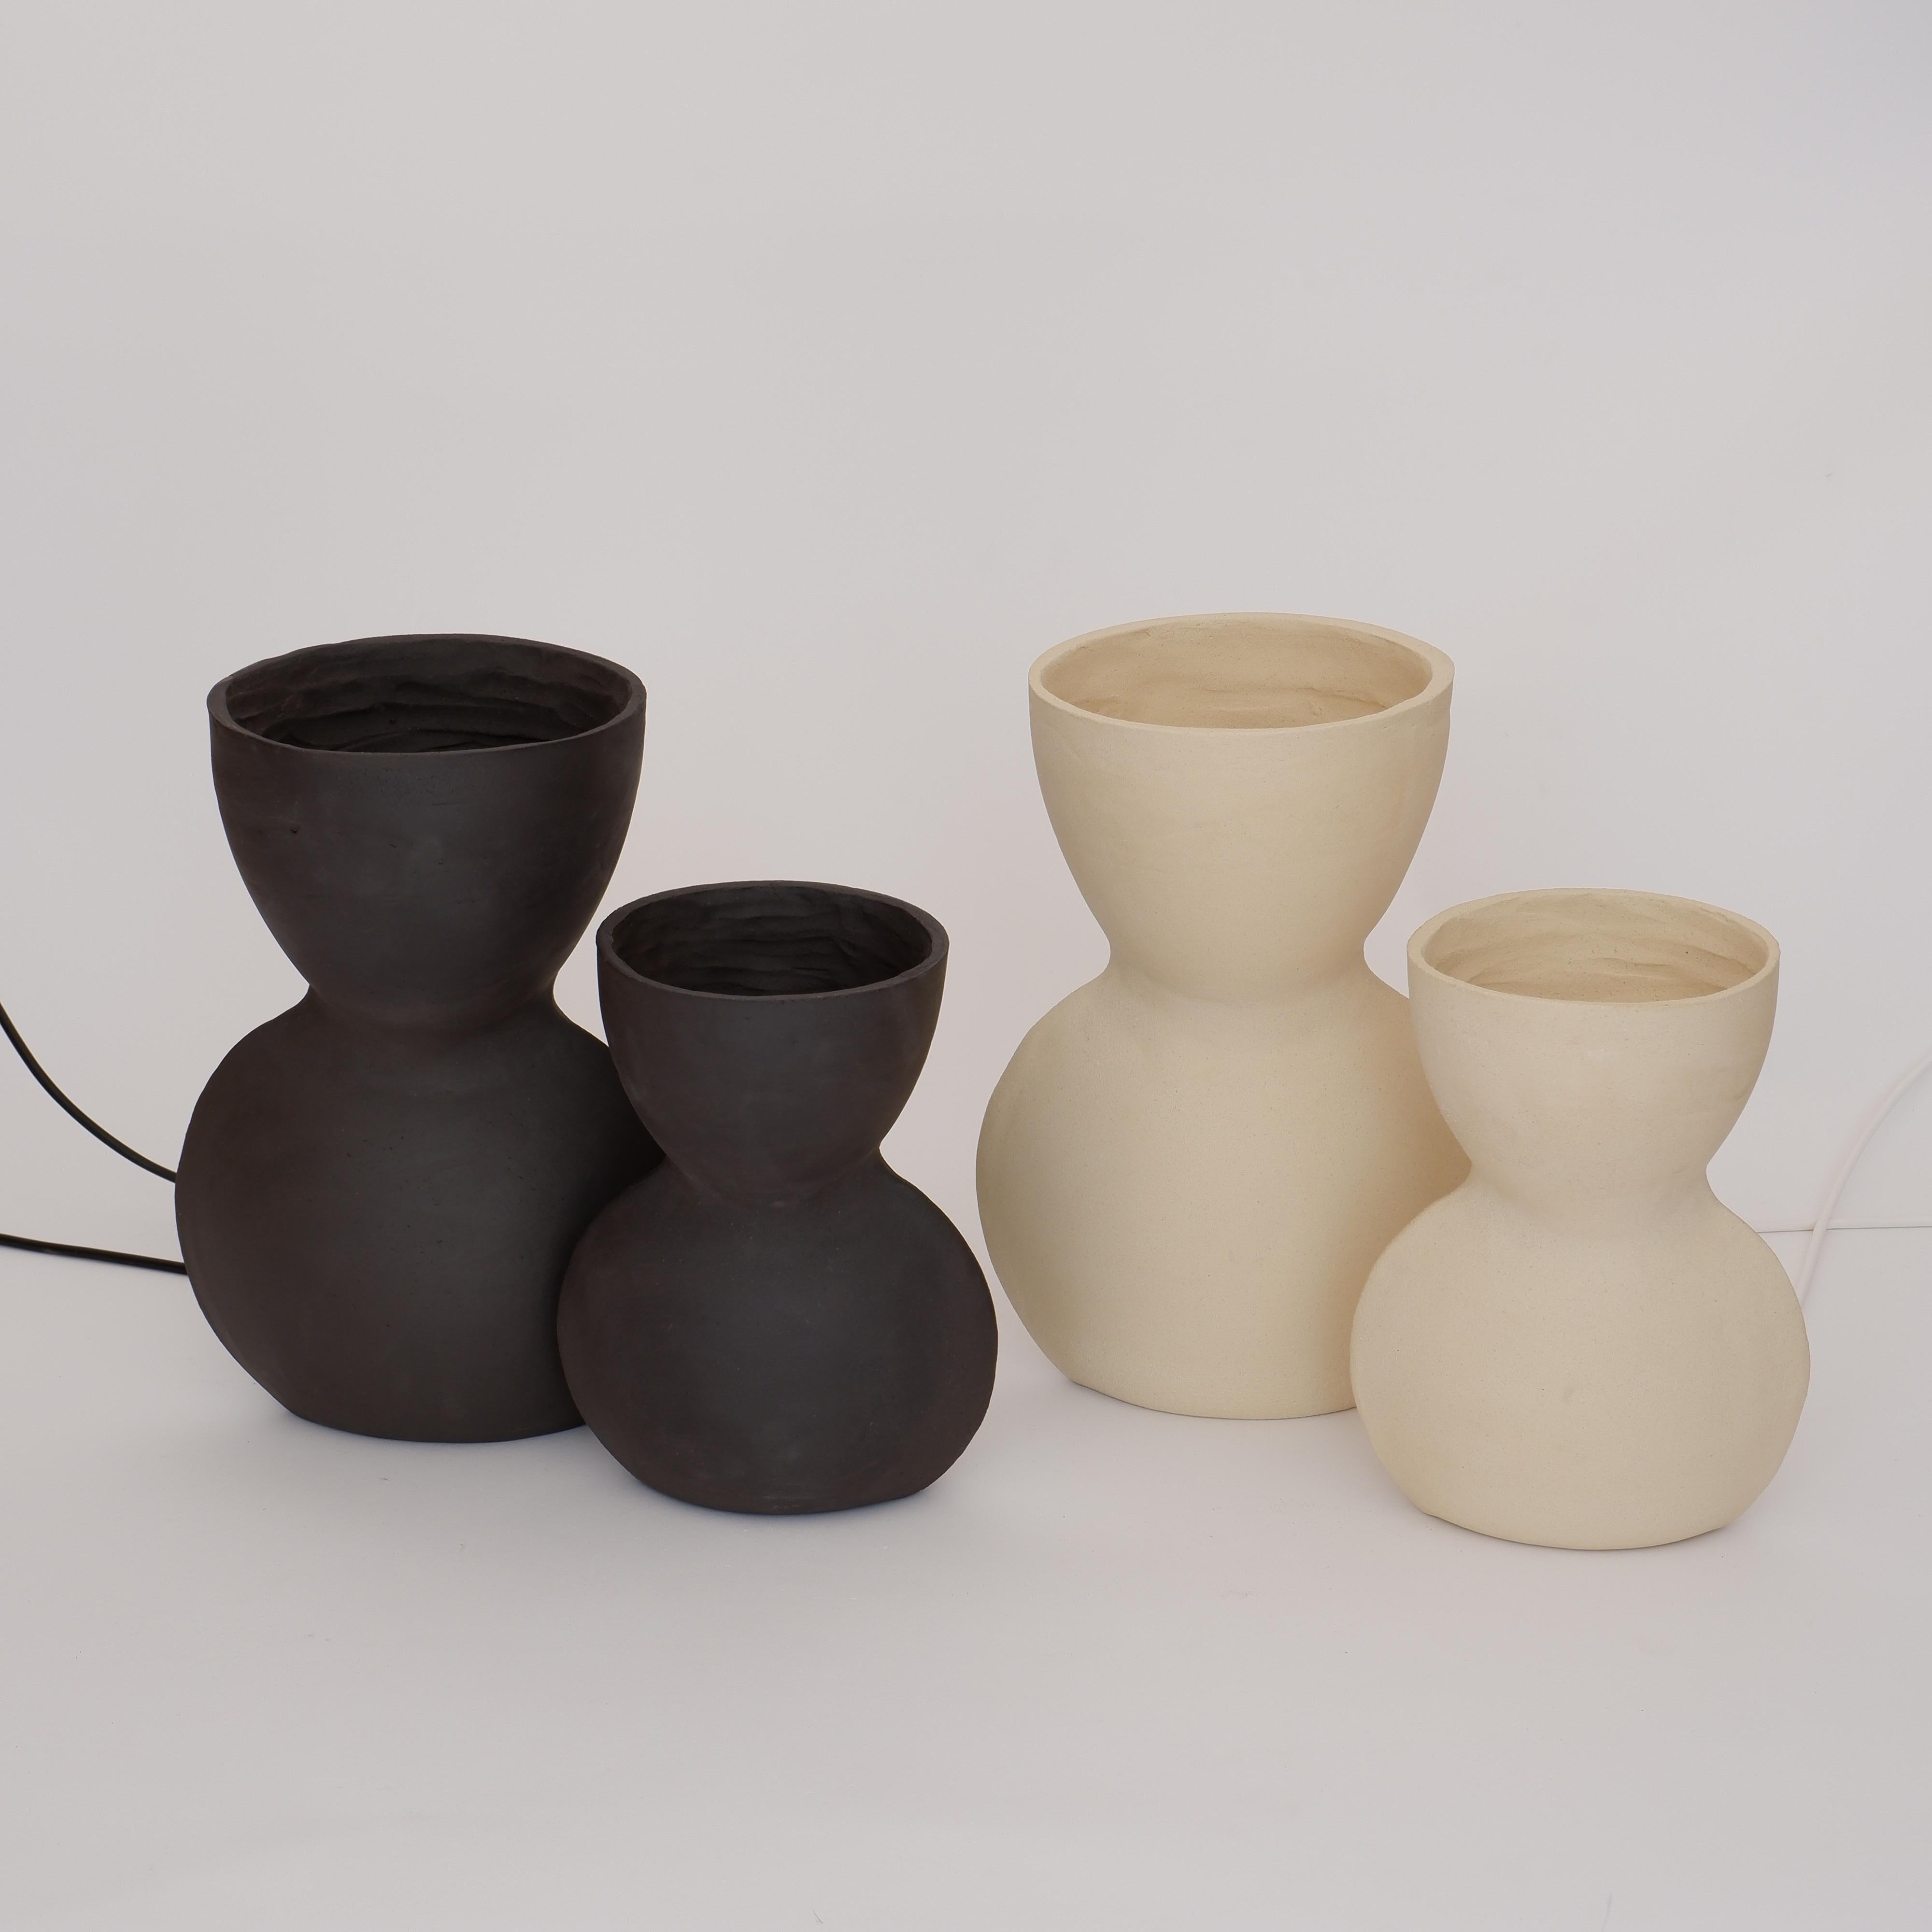 Set Of 4 Unira Black And White Lamps by Ia Kutateladze
One Of A Kind.
Dimensions: Small: D 14 x W 18 x H 25 cm.
Big: D 17 x W 23 x H 32 cm. 
Materials: Clay.

Each piece is one of a kind, due to its free hand-building process. Different color